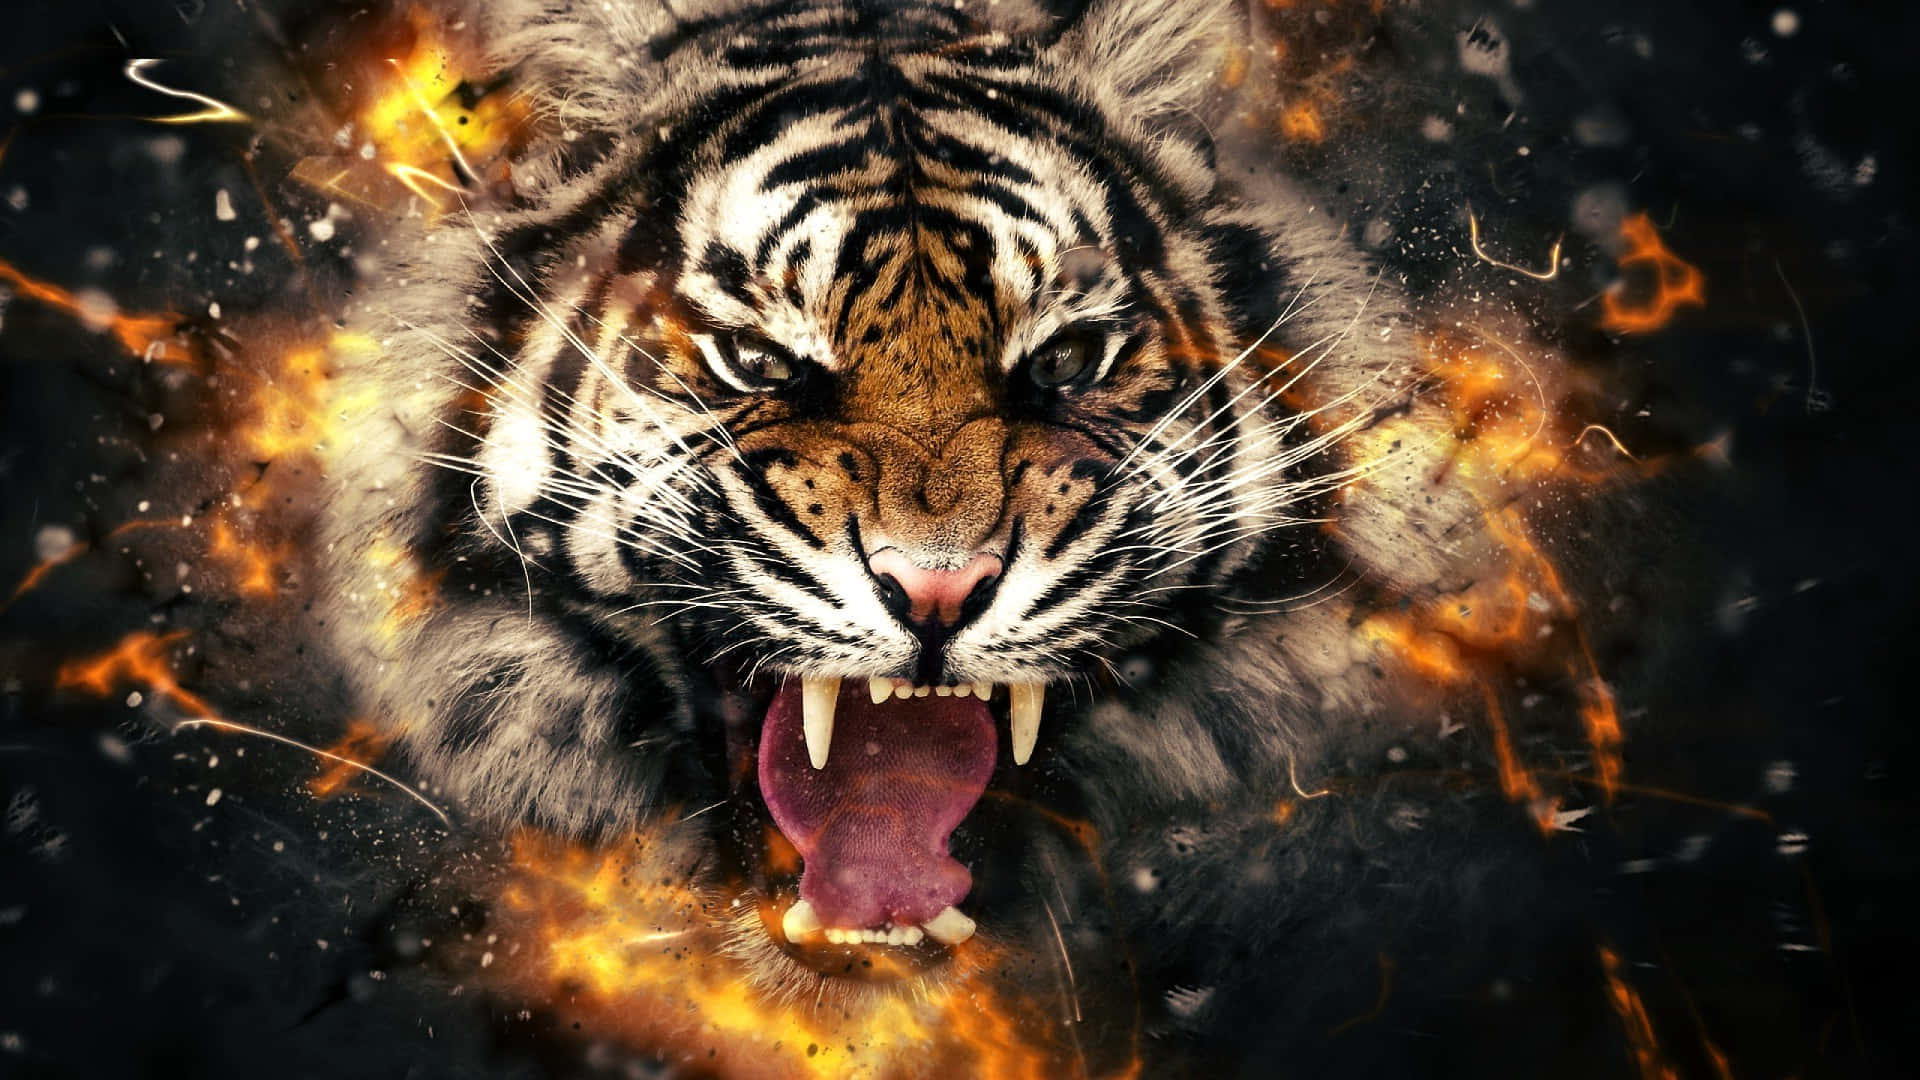 Tiger Face In Rage With Fire Background